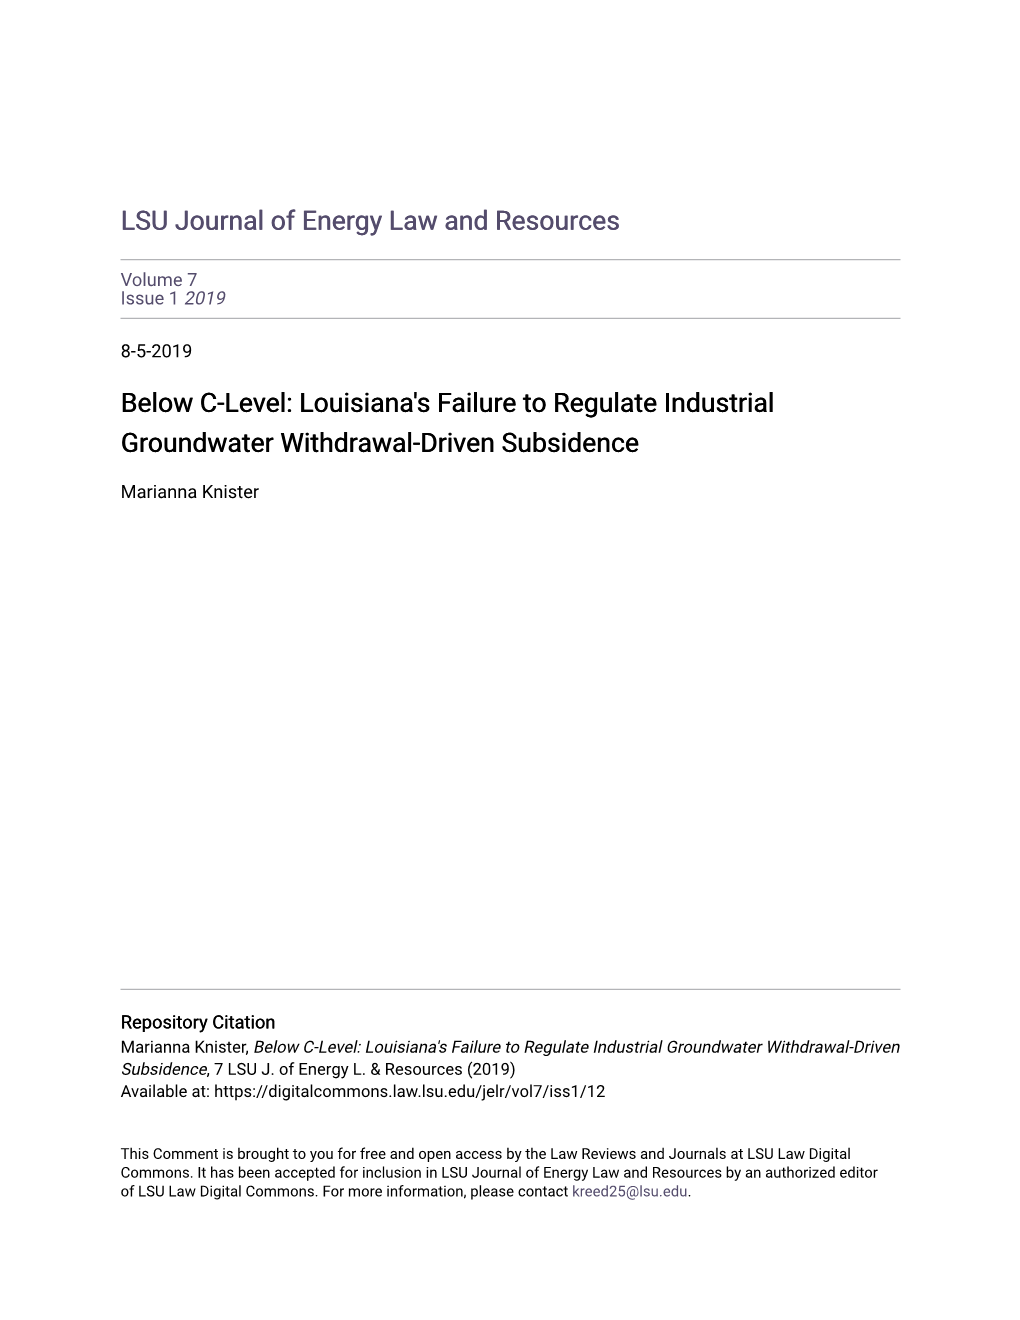 Louisiana's Failure to Regulate Industrial Groundwater Withdrawal-Driven Subsidence